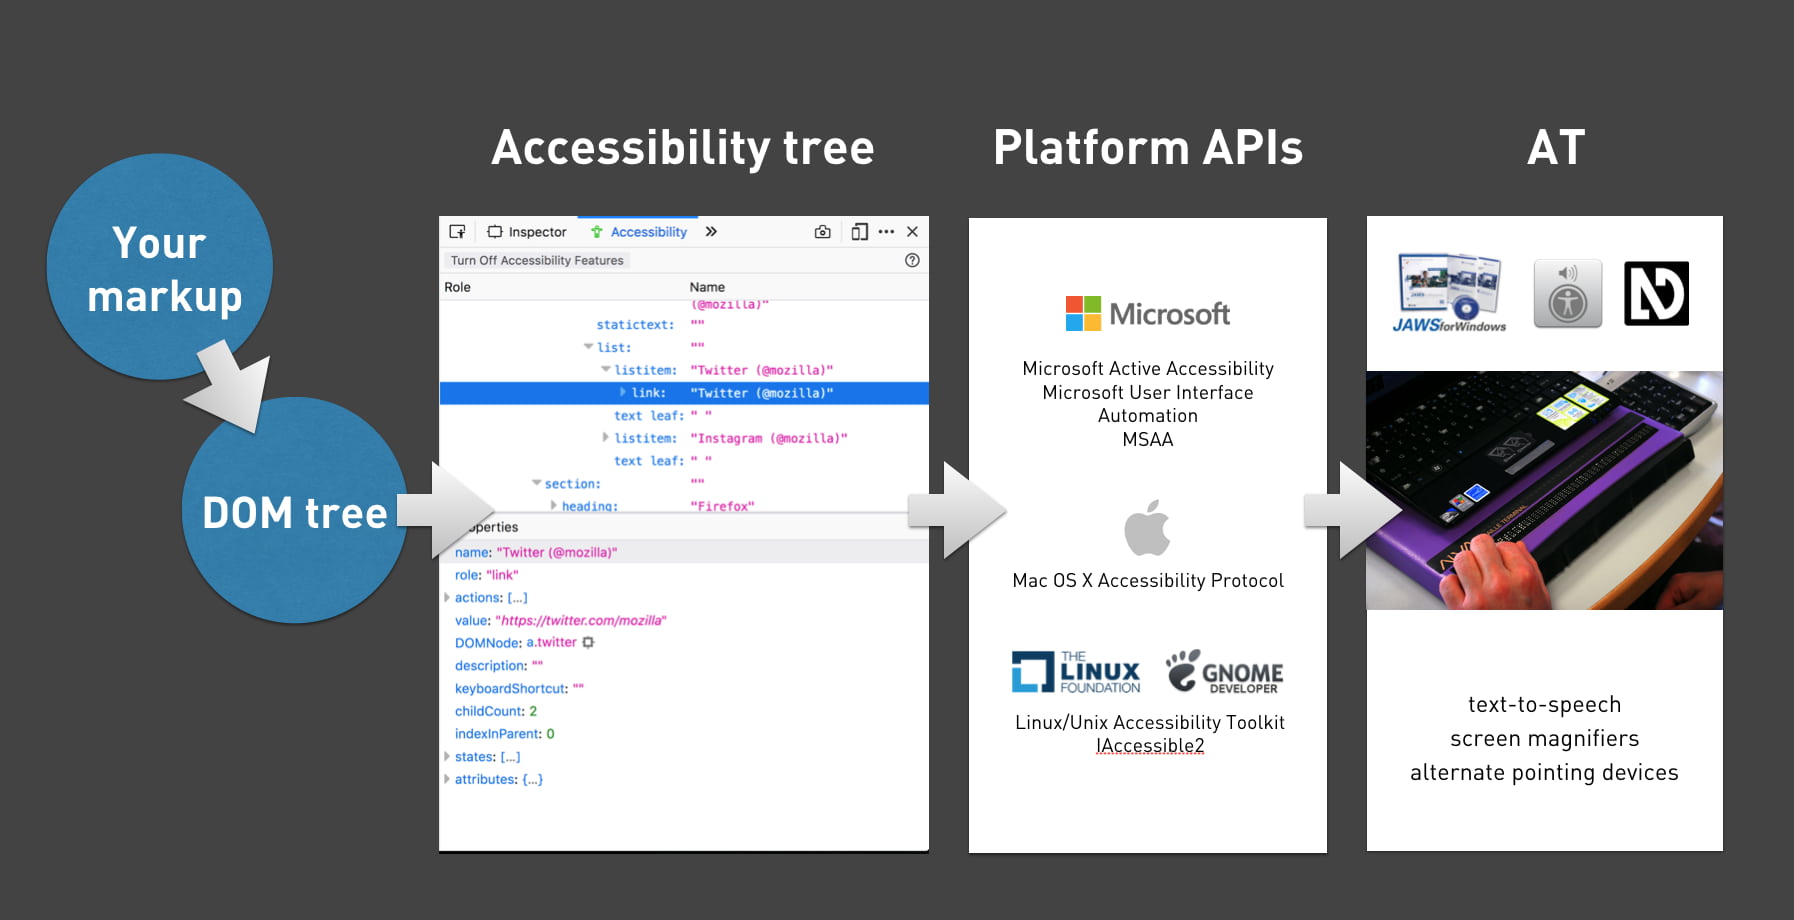 Your markup becomes a DOM tree which the accessibility is based on which is then sent to platform APIs and ultimately ends up at assistive technologies